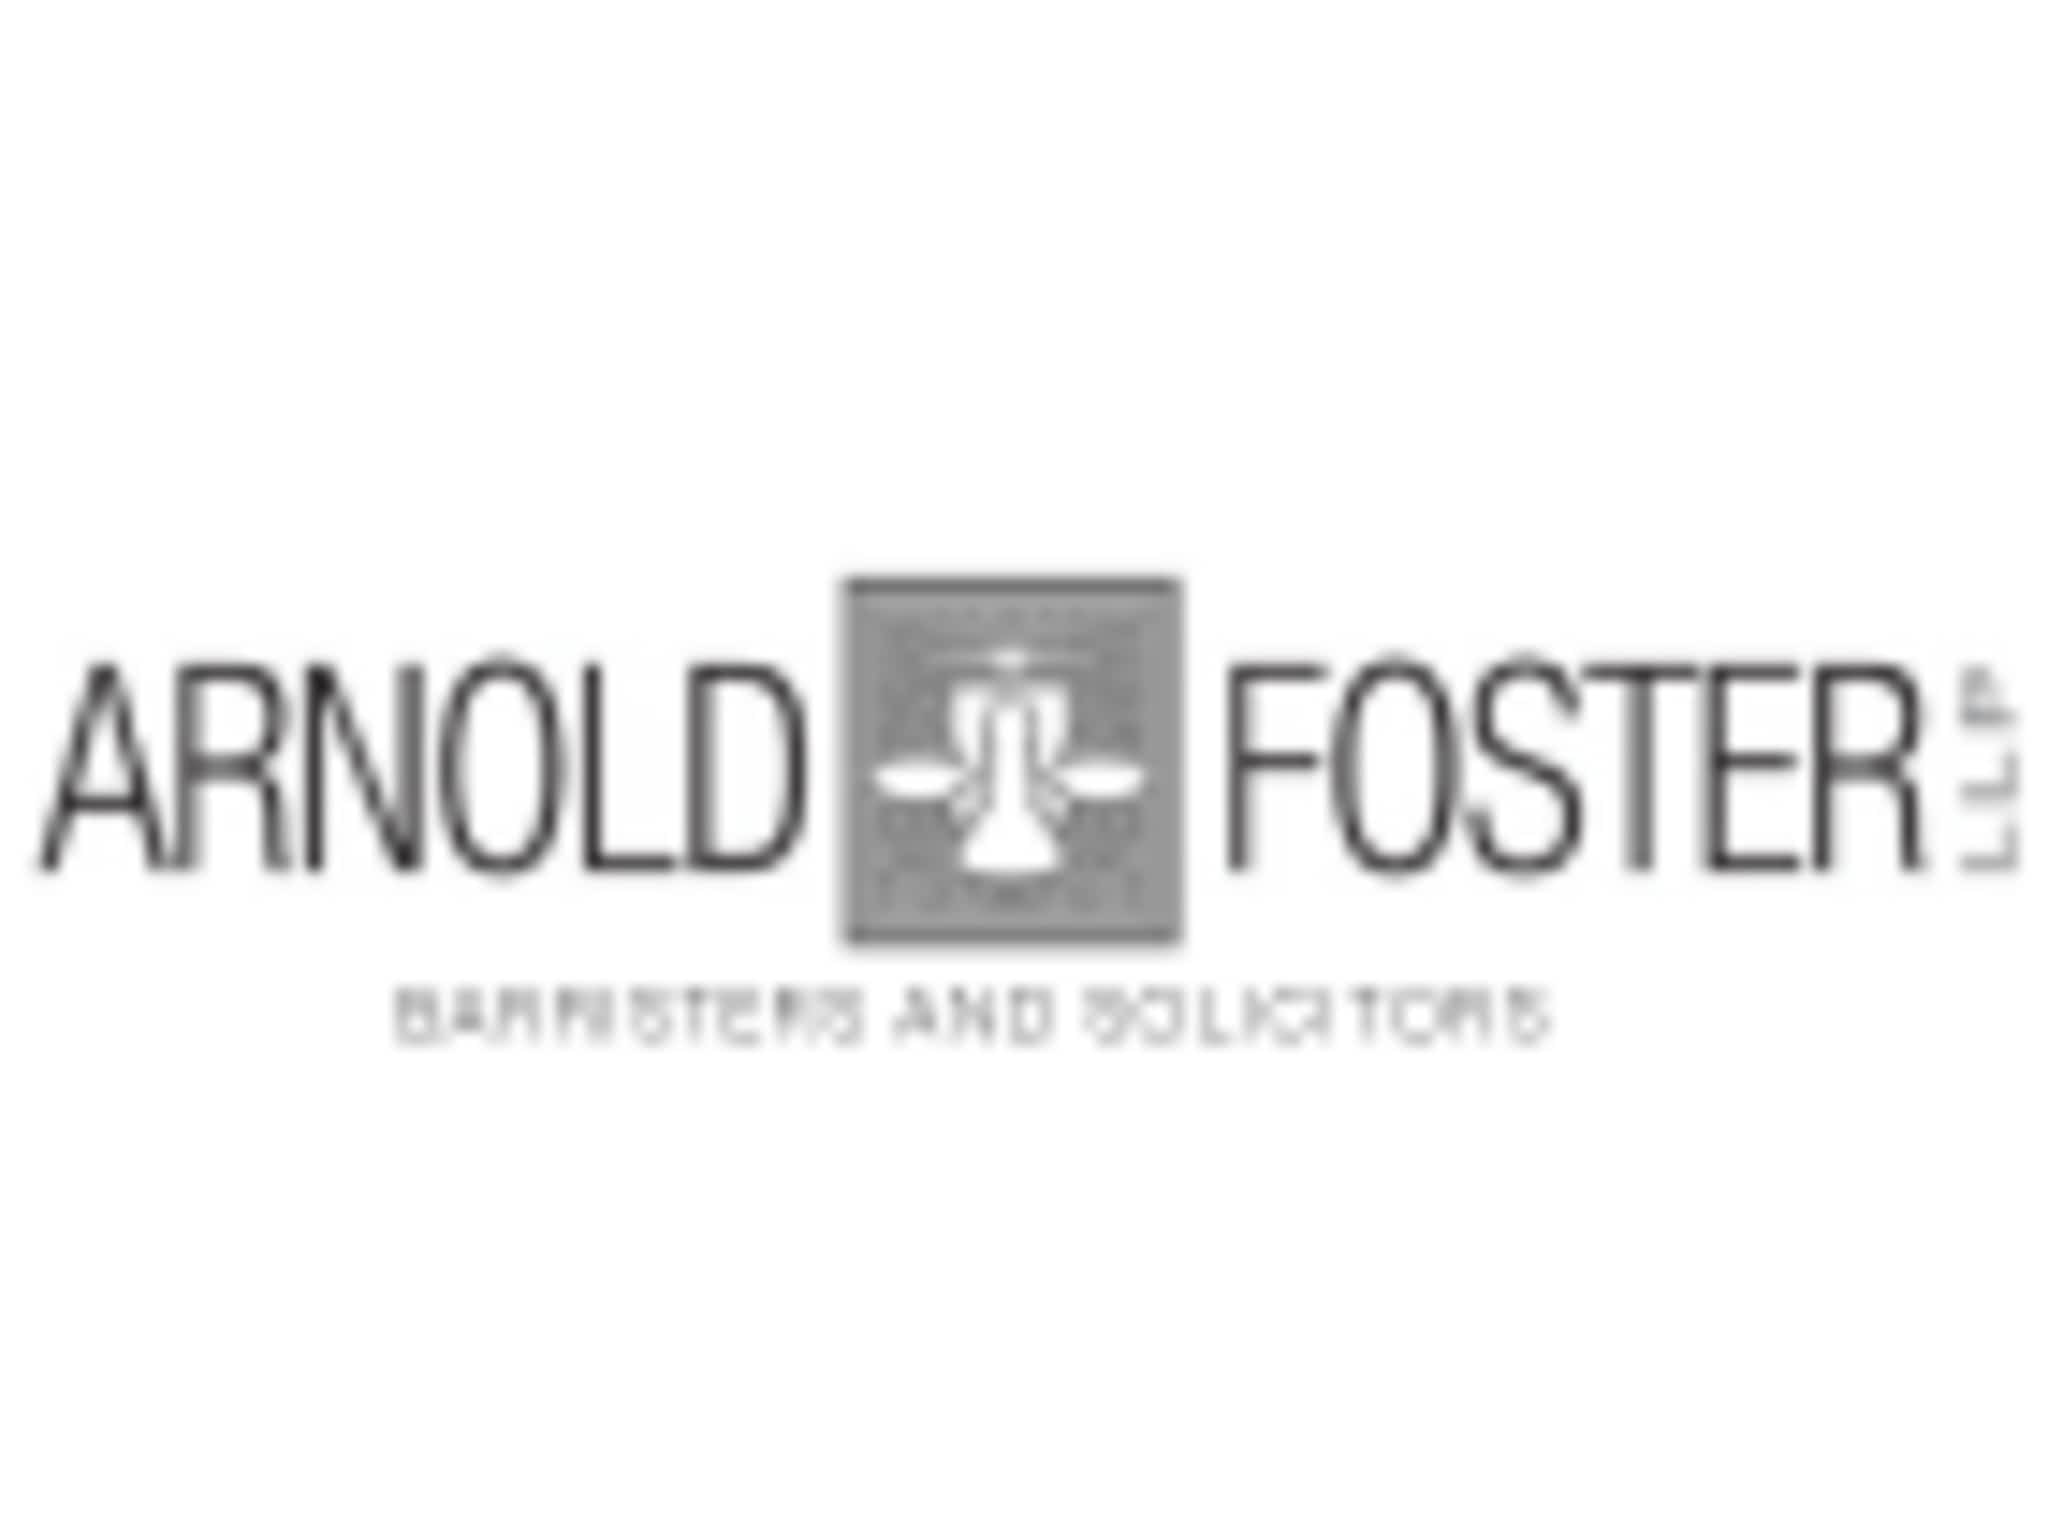 photo Arnold Foster LLP Barristers & Solicitors